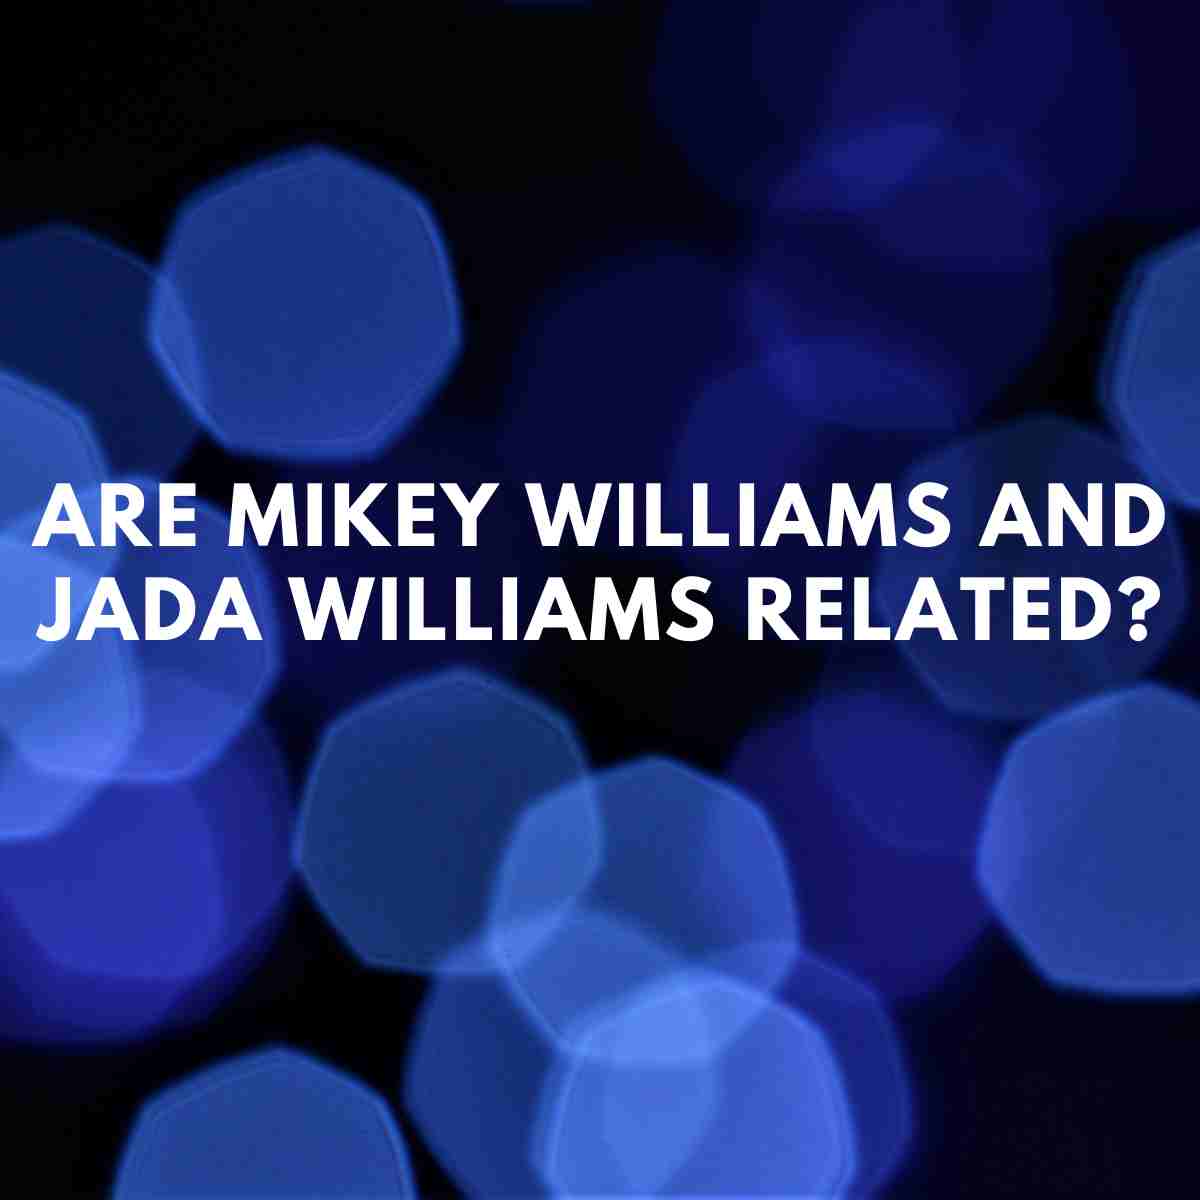 Are Mikey Williams and Jada Williams related